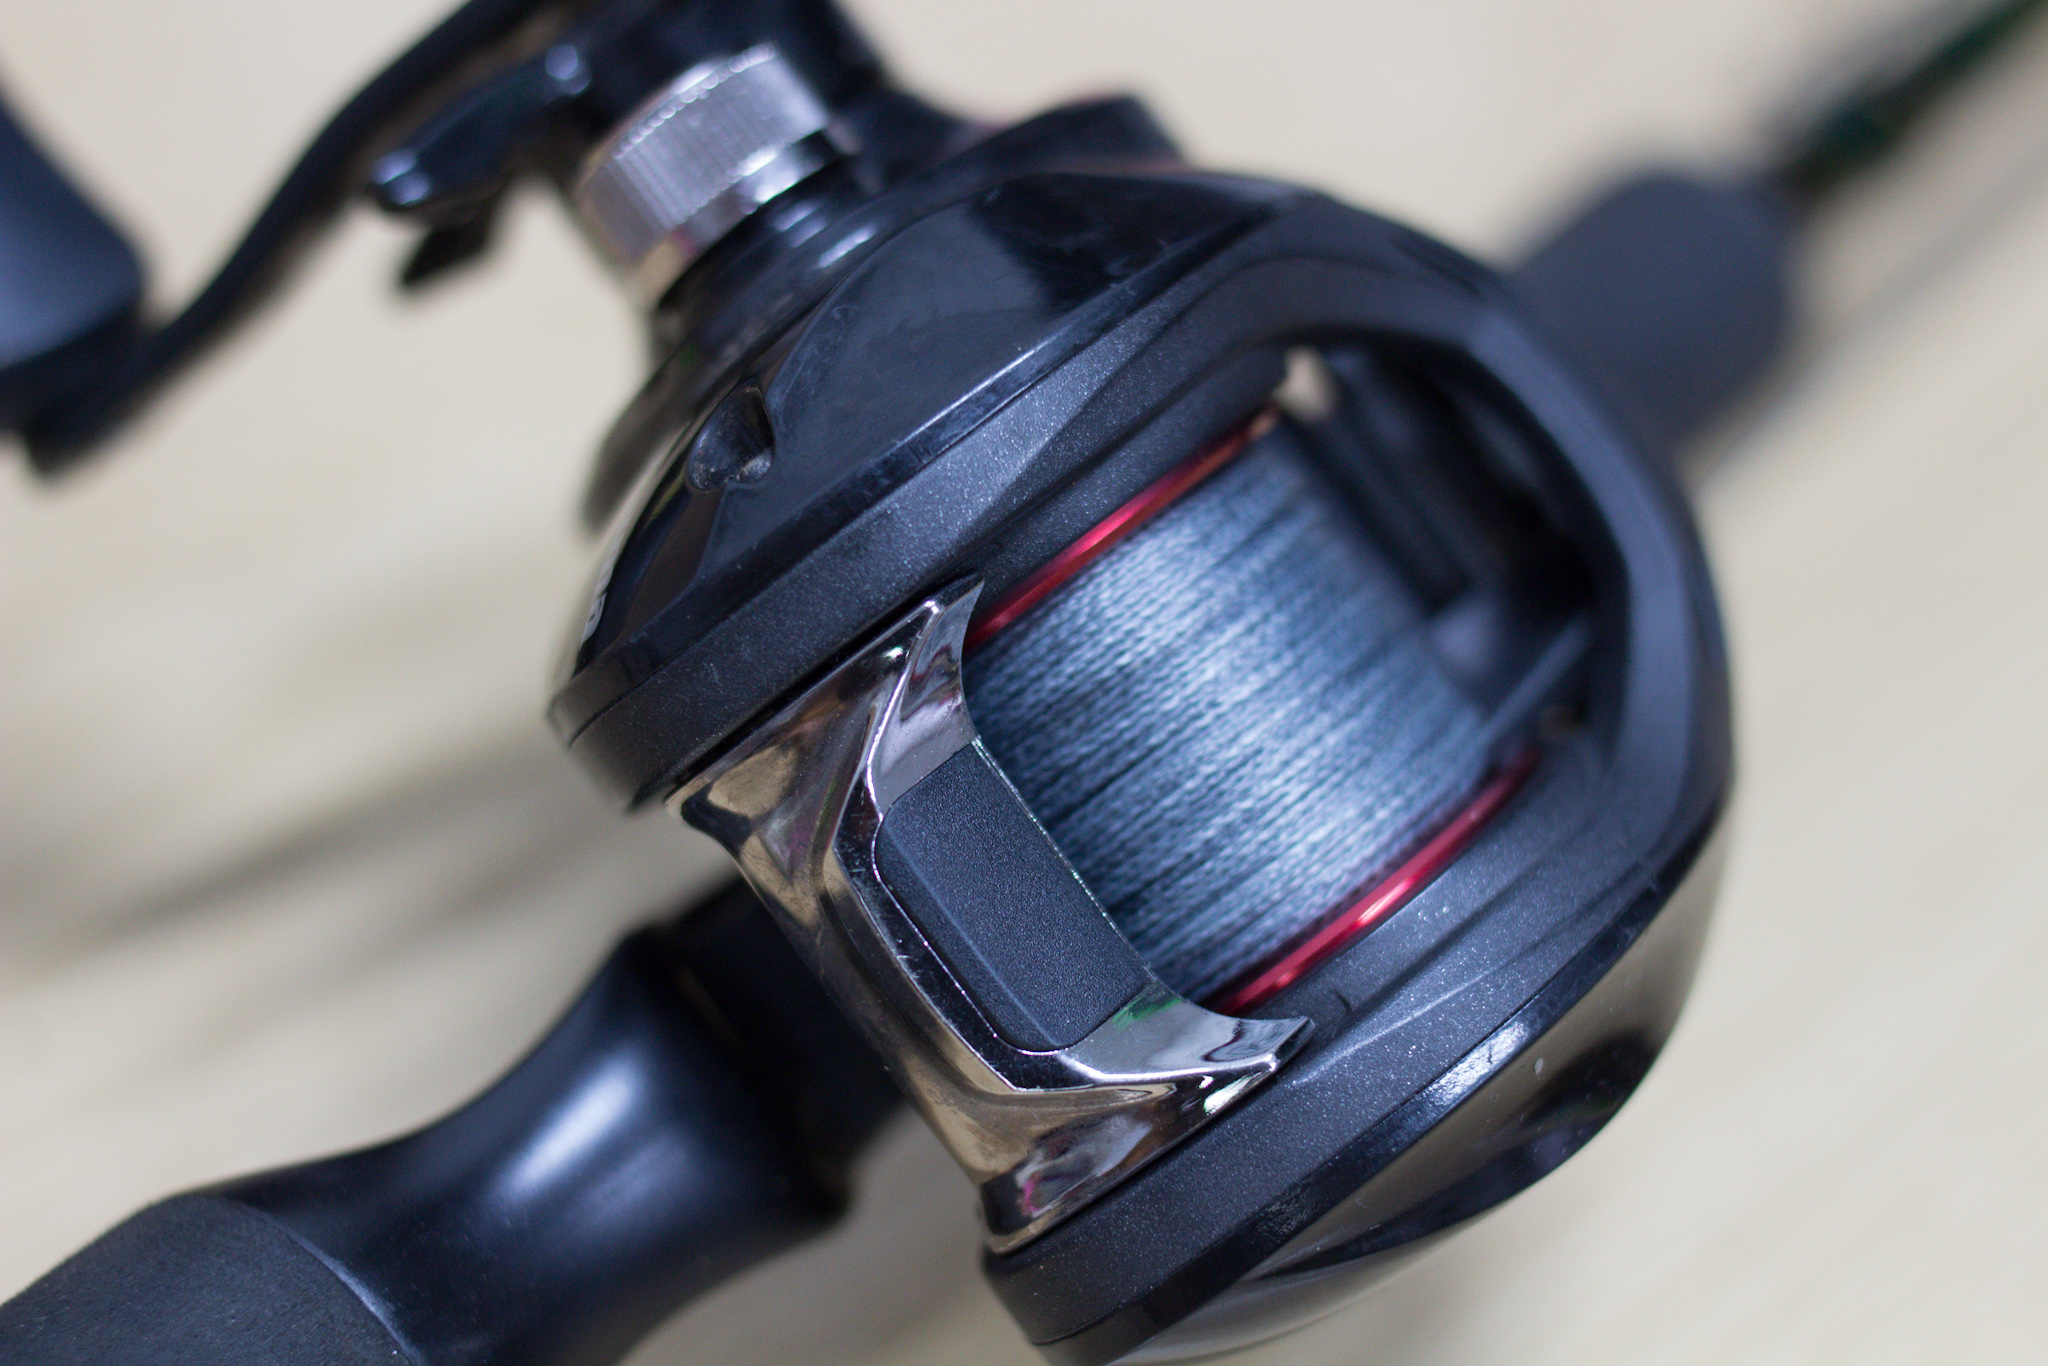 Best braided fishing line - reviewed